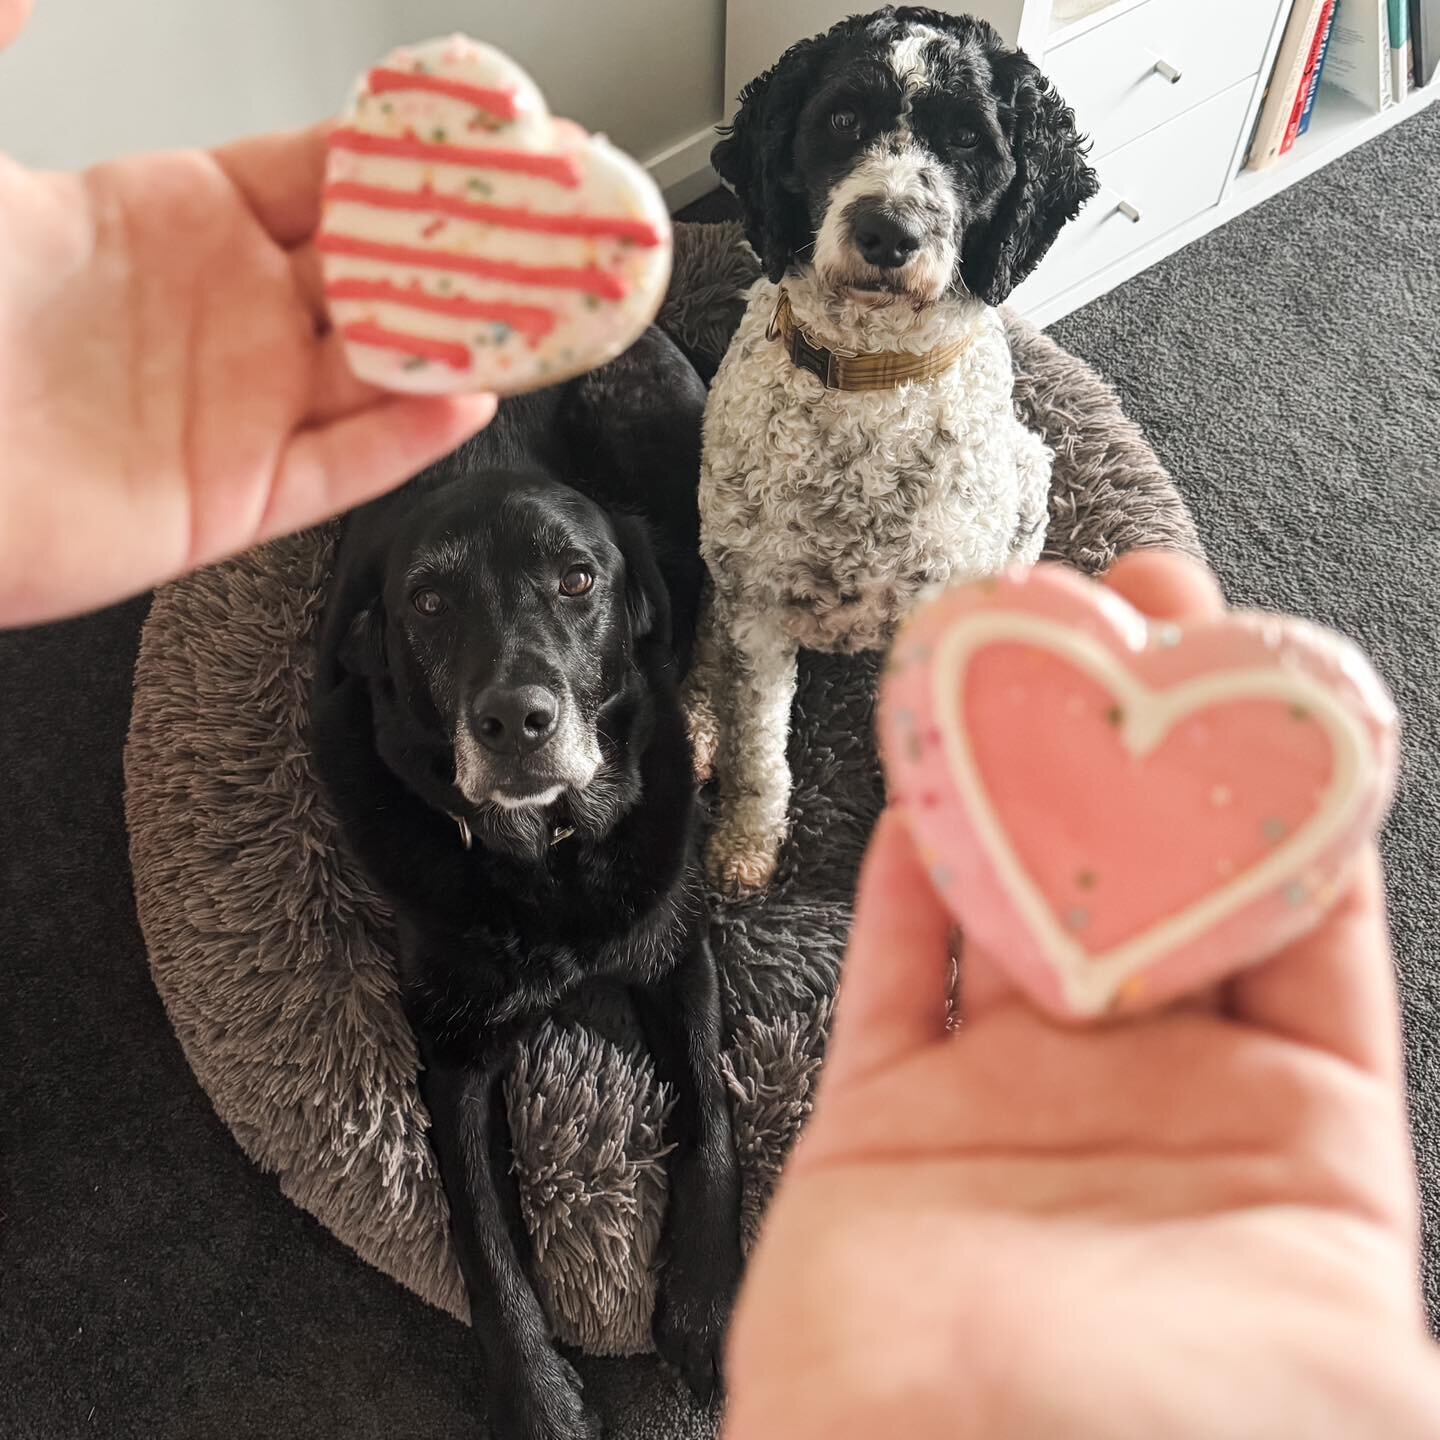 Valentine&rsquo;s Day&hellip;a time to celebrate the one(s) you love 🥰

(I&rsquo;m having a special dinner with my husband too but he&rsquo;s not trained to sit nicely for a photo like my dogs are)